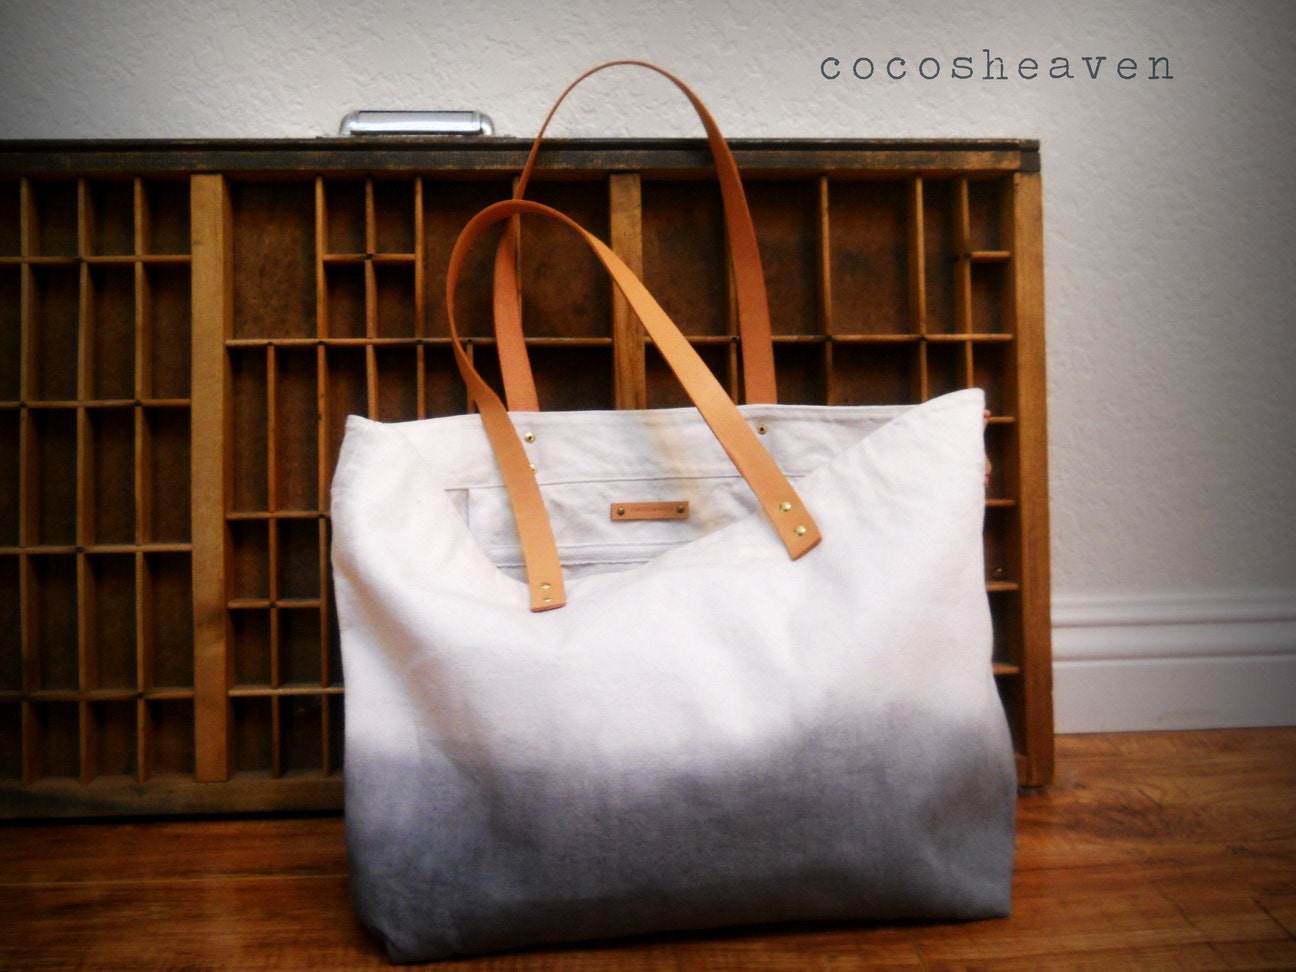 CANVAS TOTE www.ermes-unice.fr with leather www.ermes-unice.fr by cocosheaven